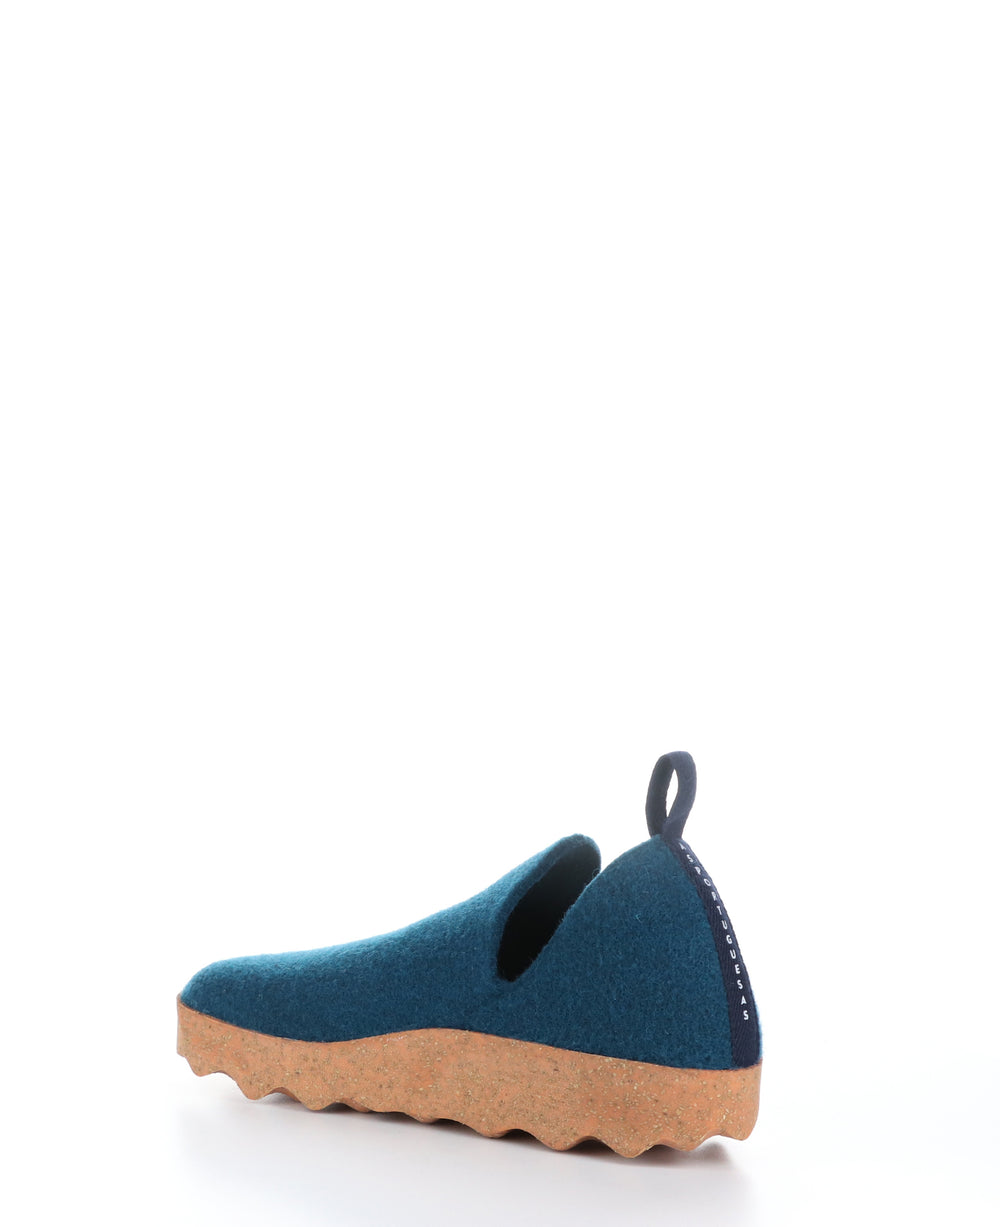 CITY Peacock Blue Round Toe Shoes|CITY Chaussures à Bout Rond in Bleu